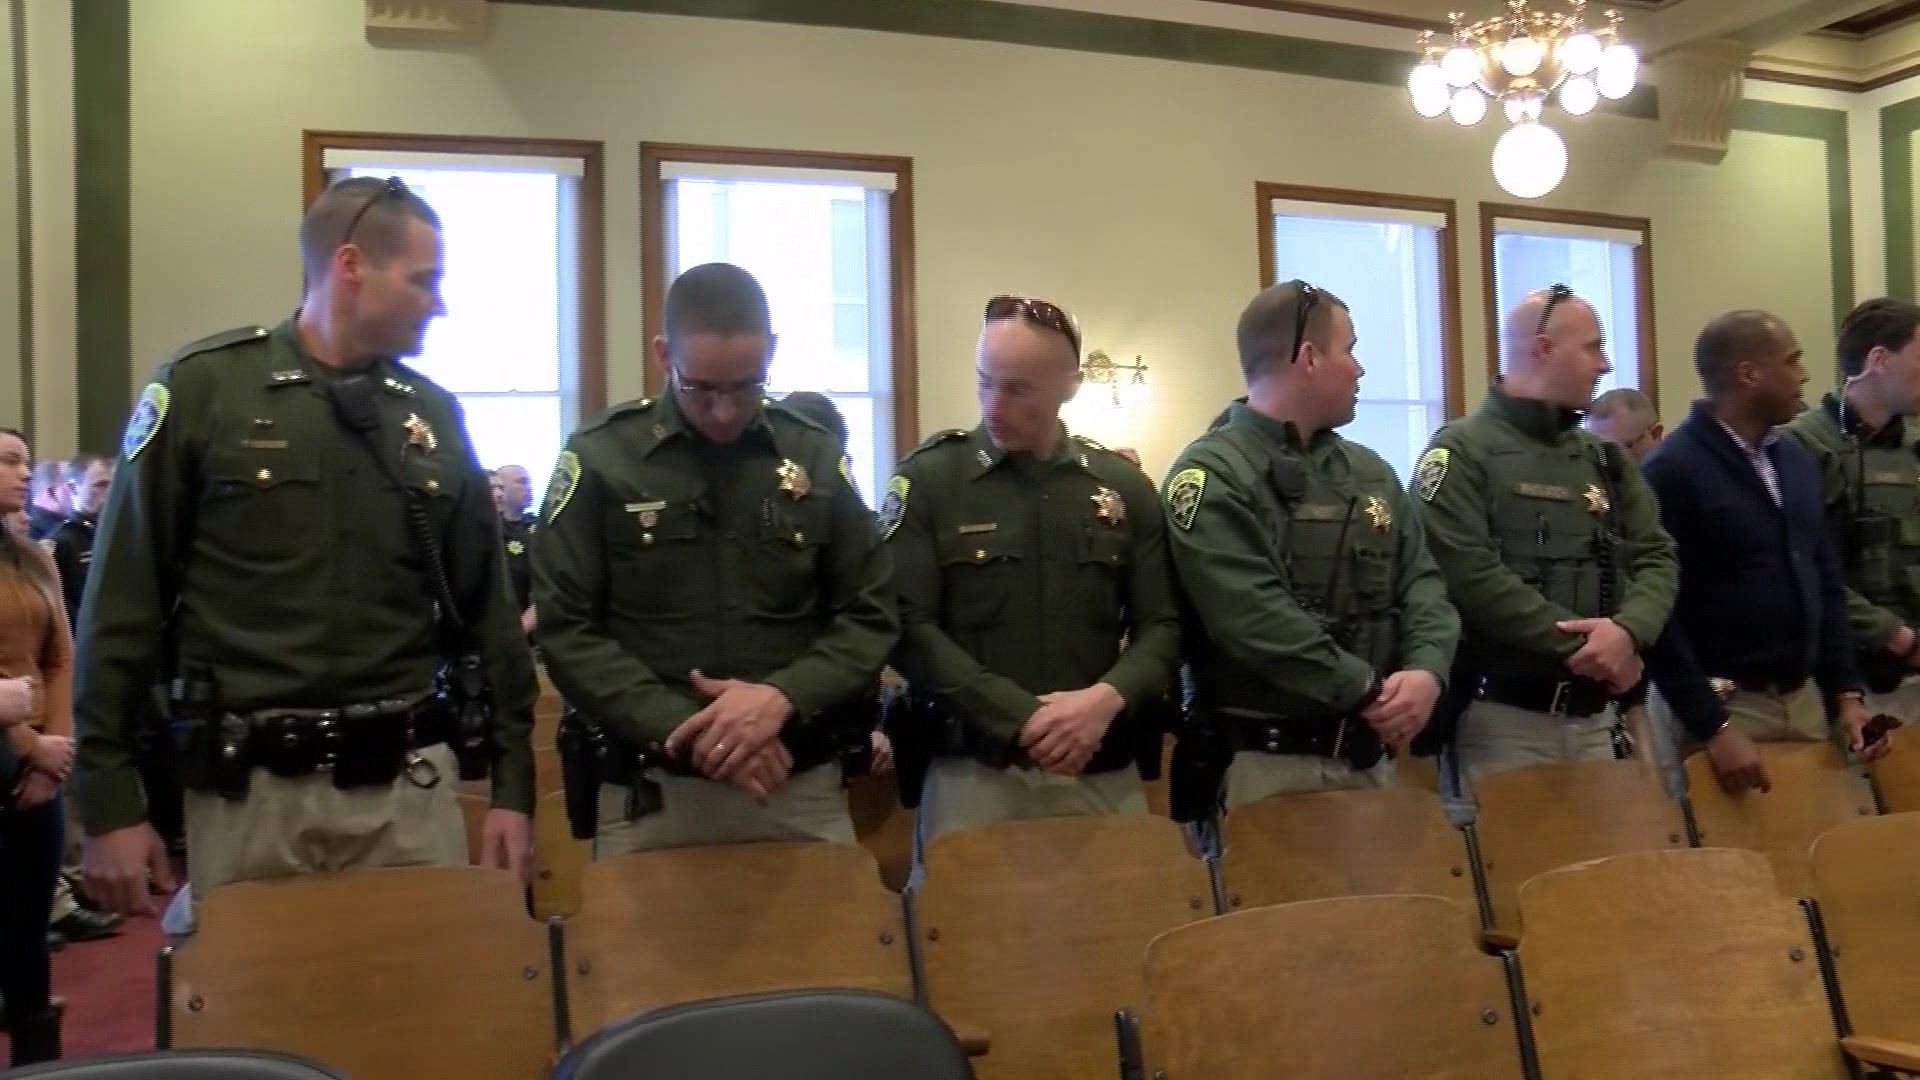 Montana Highway Patrol Trooper Wade Palmer was shot by a suspect in a Missoula shooting last week. On Monday, his brothers in law enforcement showed up to support him at the suspect's hearing.